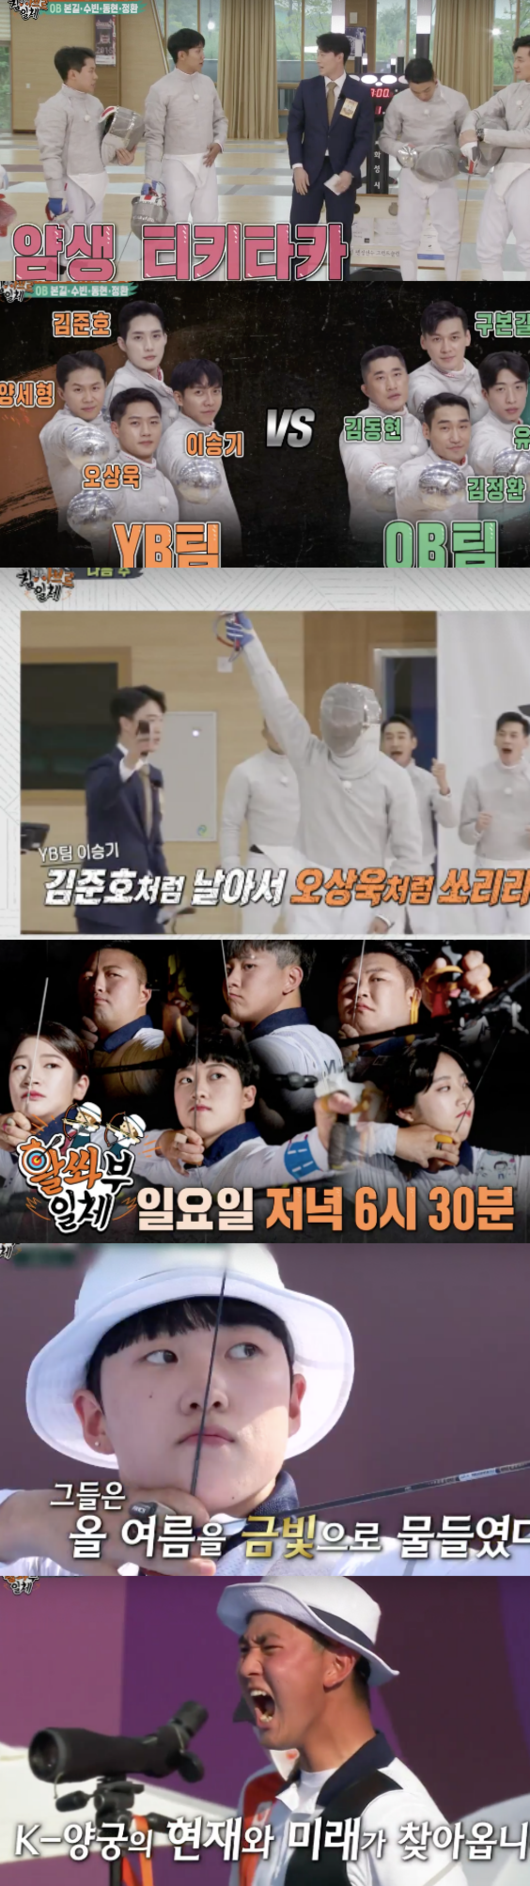 Members of All The Butlers also attracted attention with the visuals of the surprised men fencing Sabre national team Kim Jung-hwan, Gu Bon-gil, Kim Jun-ho and Oh Sang-wook.Above all, he gave a fencing one-point lesson and attracted attention.On the 15th, SBS entertainment All The Butlers featured an Olympic Games Hero feature.On this day, men fencing Sabre national team Kim Jung-hwan, Gu Bon-gil, Kim Jun-ho, and Oh Sang-wook appeared and cheered all the world class Heroes.Even Lee Seung-gi admired that this is Celebrity, really handsome and handsome.Yang Se-hyeong also admitted, I was confused about whether it was a fencing movie.When asked if the members felt the popularity, Gu Bon-gil said, It felt like a Hollywood star when I arrived at the airport. He laughed, saying, A brilliant flashlight burst.He said, I will catch Yang Se-hyeong tension. He said, I thought that the purpose of winning the Olympic Games medal was to jump into the broadcast. He said, You decided to do it, I came to the broadcast.In earnest, the players said, I will give you Kfencing Initiation. I did not get attention 10 years ago, and it was a sport born in Europe, and now it is a time of reverse export to Korea.Kim Jung-hwan then took off the taping and watched the scene together.Kim Jung-hwan said, That scene is a crying button, and I want to have a hormone change because I am not in the next year. Kim Jun-ho cut off the timing of tears and laughed.I opened a so-called Kfencing tweezers classroom with the atmosphere.From the showering, the basic of fencing is initiation that it is the lower body, and it is the psychological warfare of fencing that the small run should be recognized and the ability should be trusted.Prior to the showdown, the team was divided into OB and YB teams. They started full-scale team training.Gu Bon-gil summoned commentator Won Woo-young, saying, I have a special judgment, and SBS representative Woolbo.In the trailer, K-fencing big matches, which are getting more intense, are foreseen, and fencing protagonists are also more intense than Olympic Games.On the other hand, All The Butlers is a program that presents a special day that will be a feeling to young people who are wandering in the most brilliant moment of life, many questions. It will be broadcast on SBS every Sunday at 6:25 pm.Capture All The Butlers Broadcast Screen